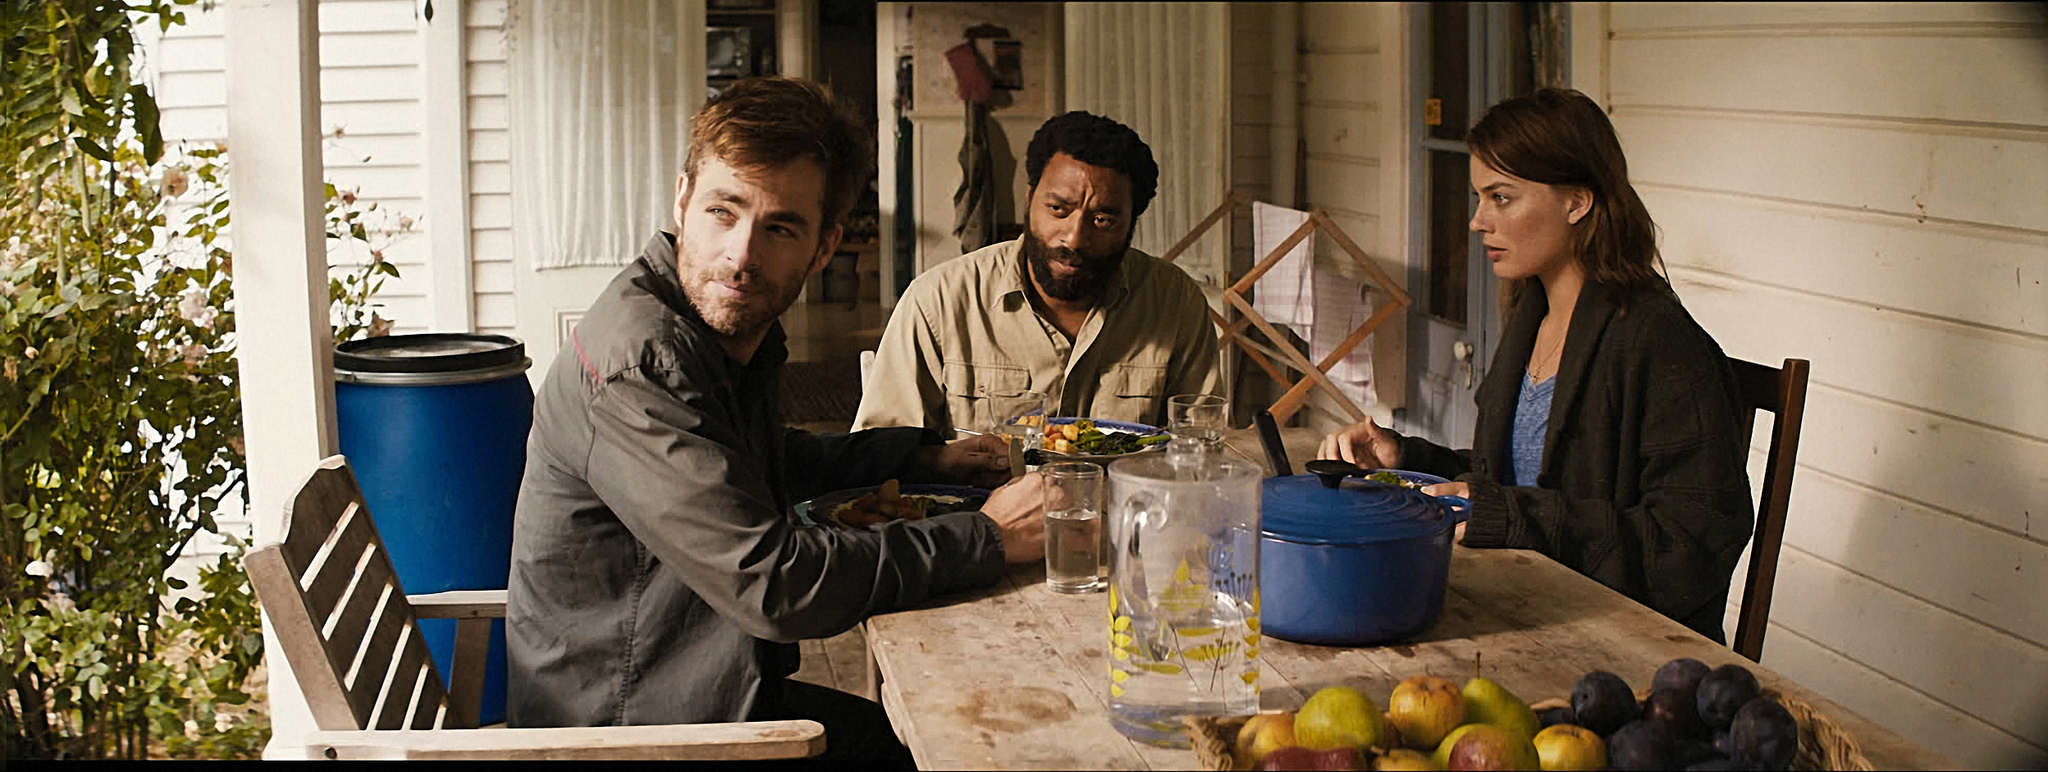 Still of Chiwetel Ejiofor, Chris Pine and Margot Robbie in Z for Zachariah (2015)